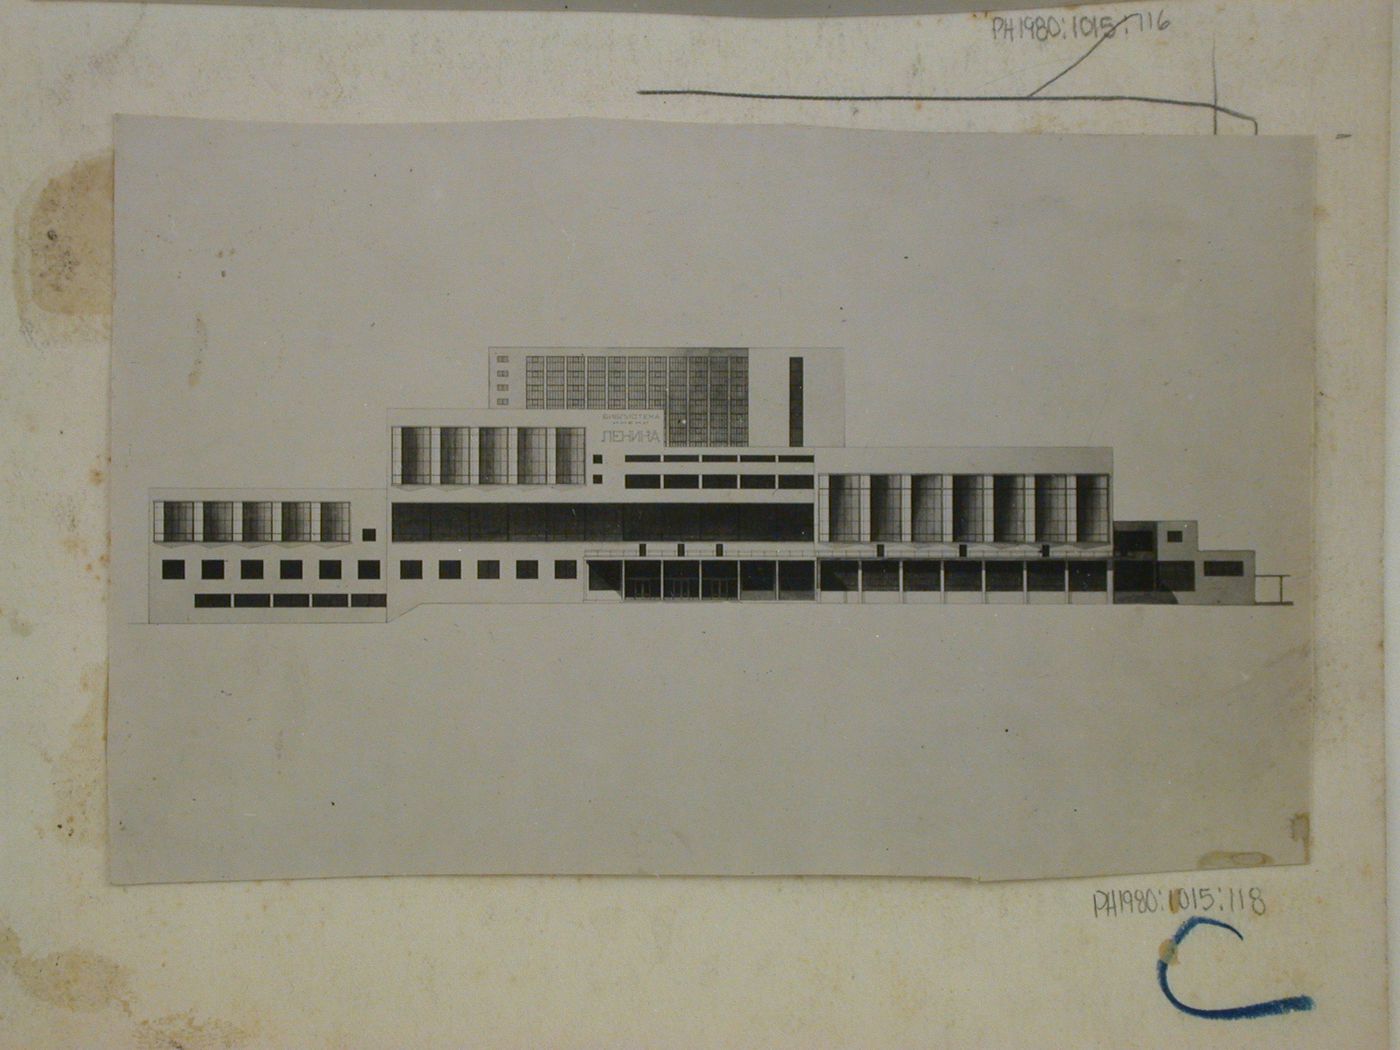 View of an elevation drawing for a library, U.S.S.R. (now Russia)